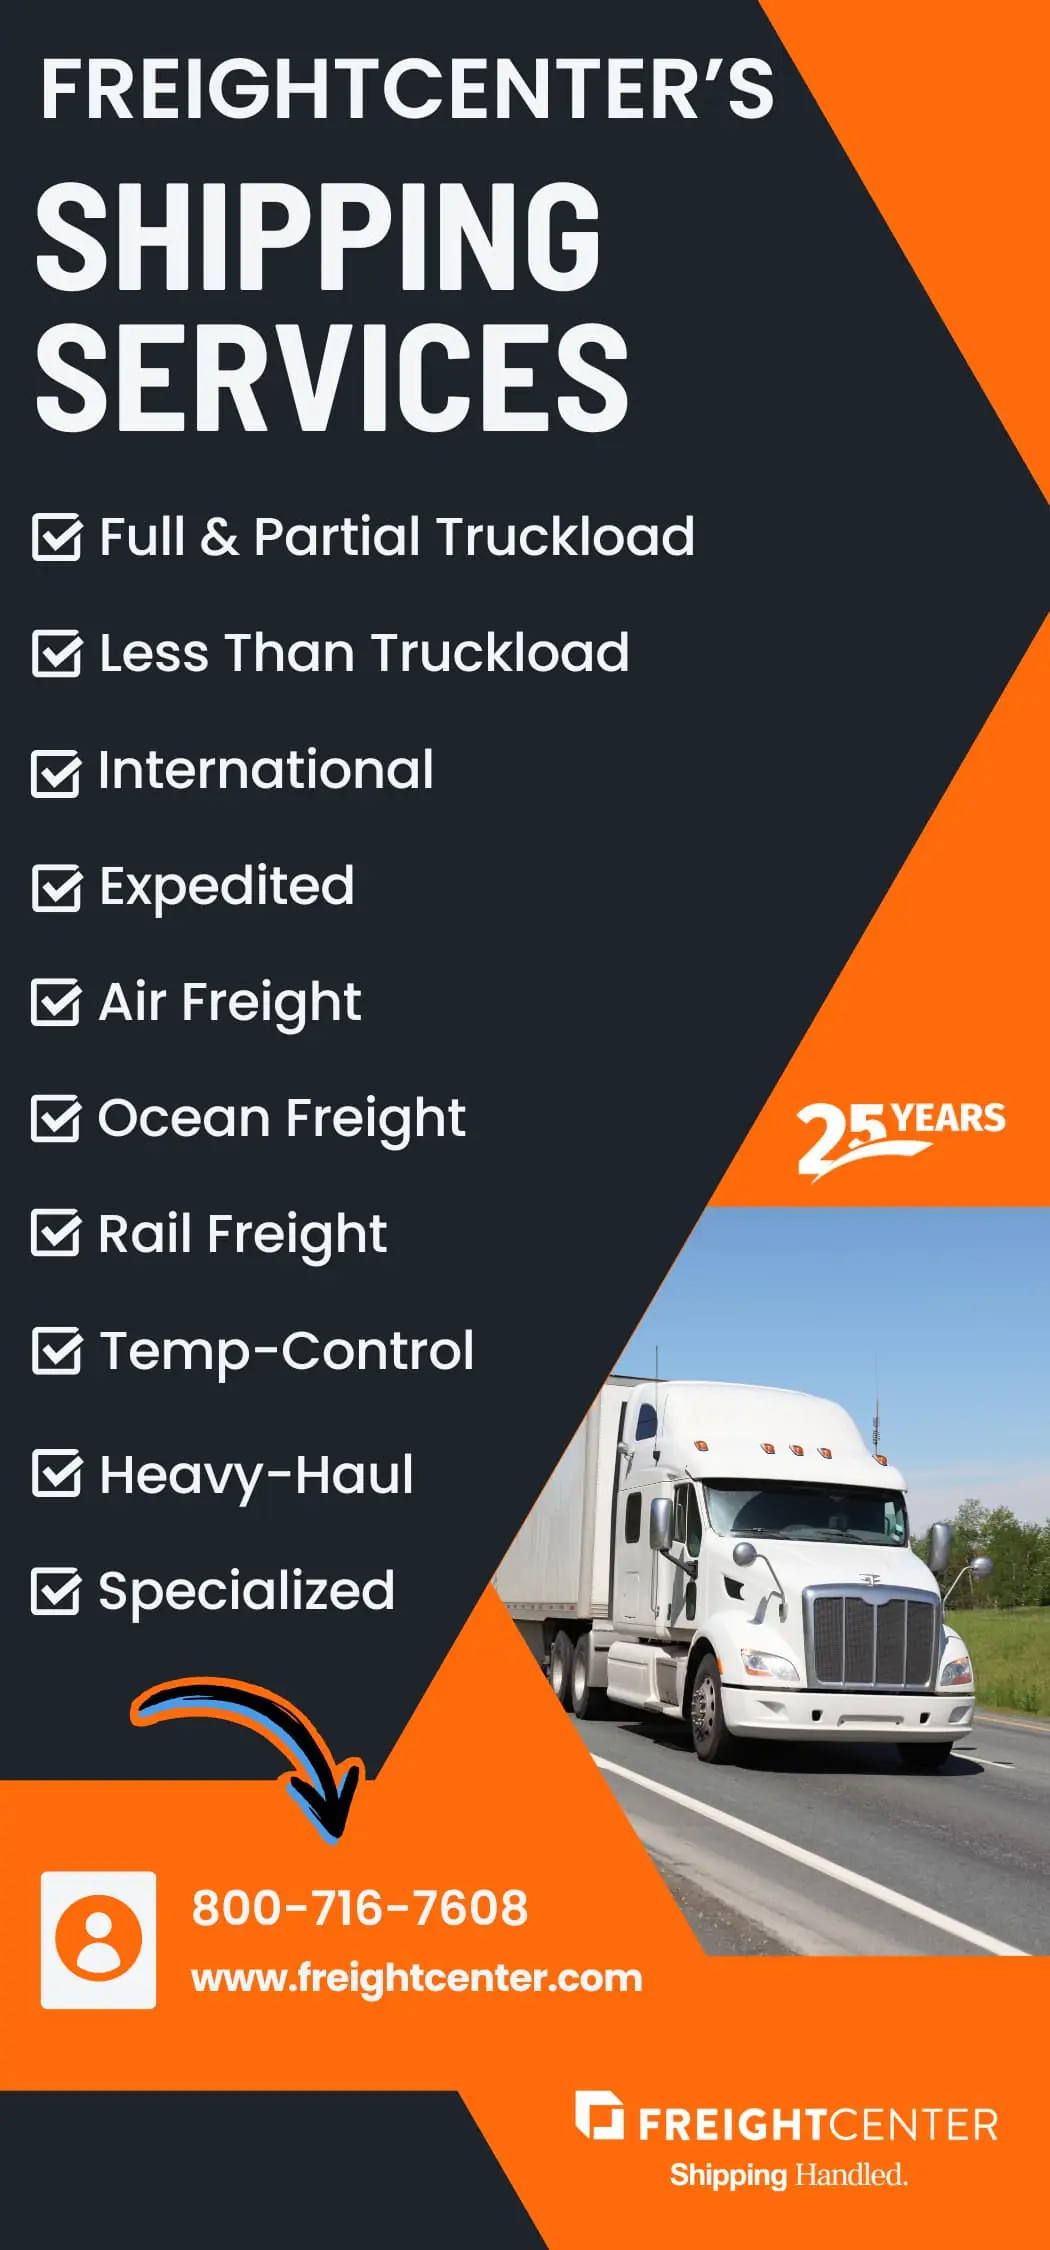 Flyer that lists FreightCenters Shipping Services